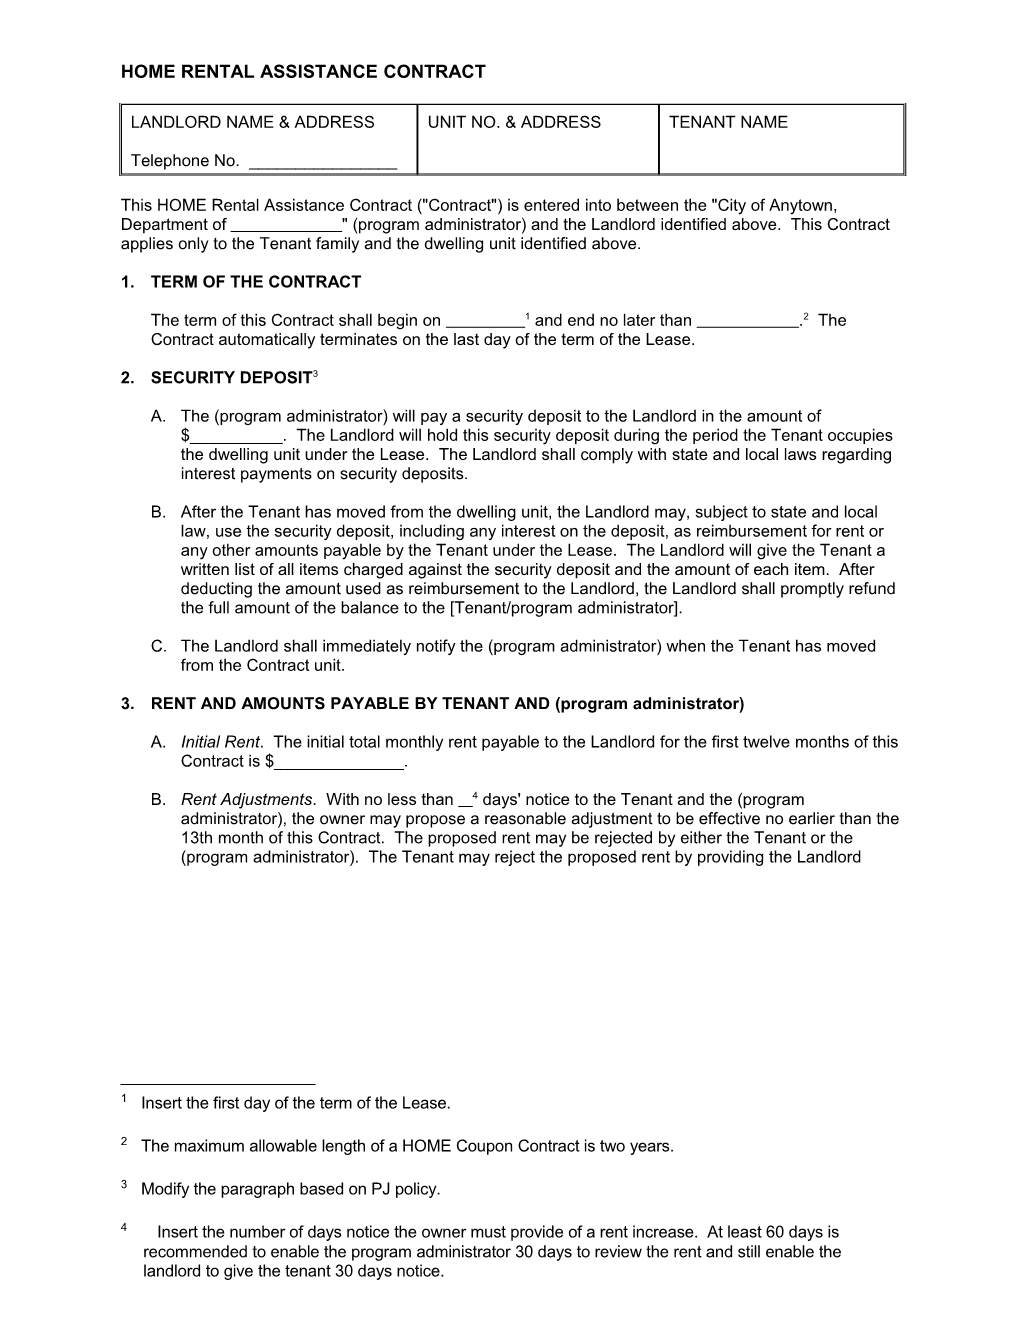 Home Rental Assistance Contract